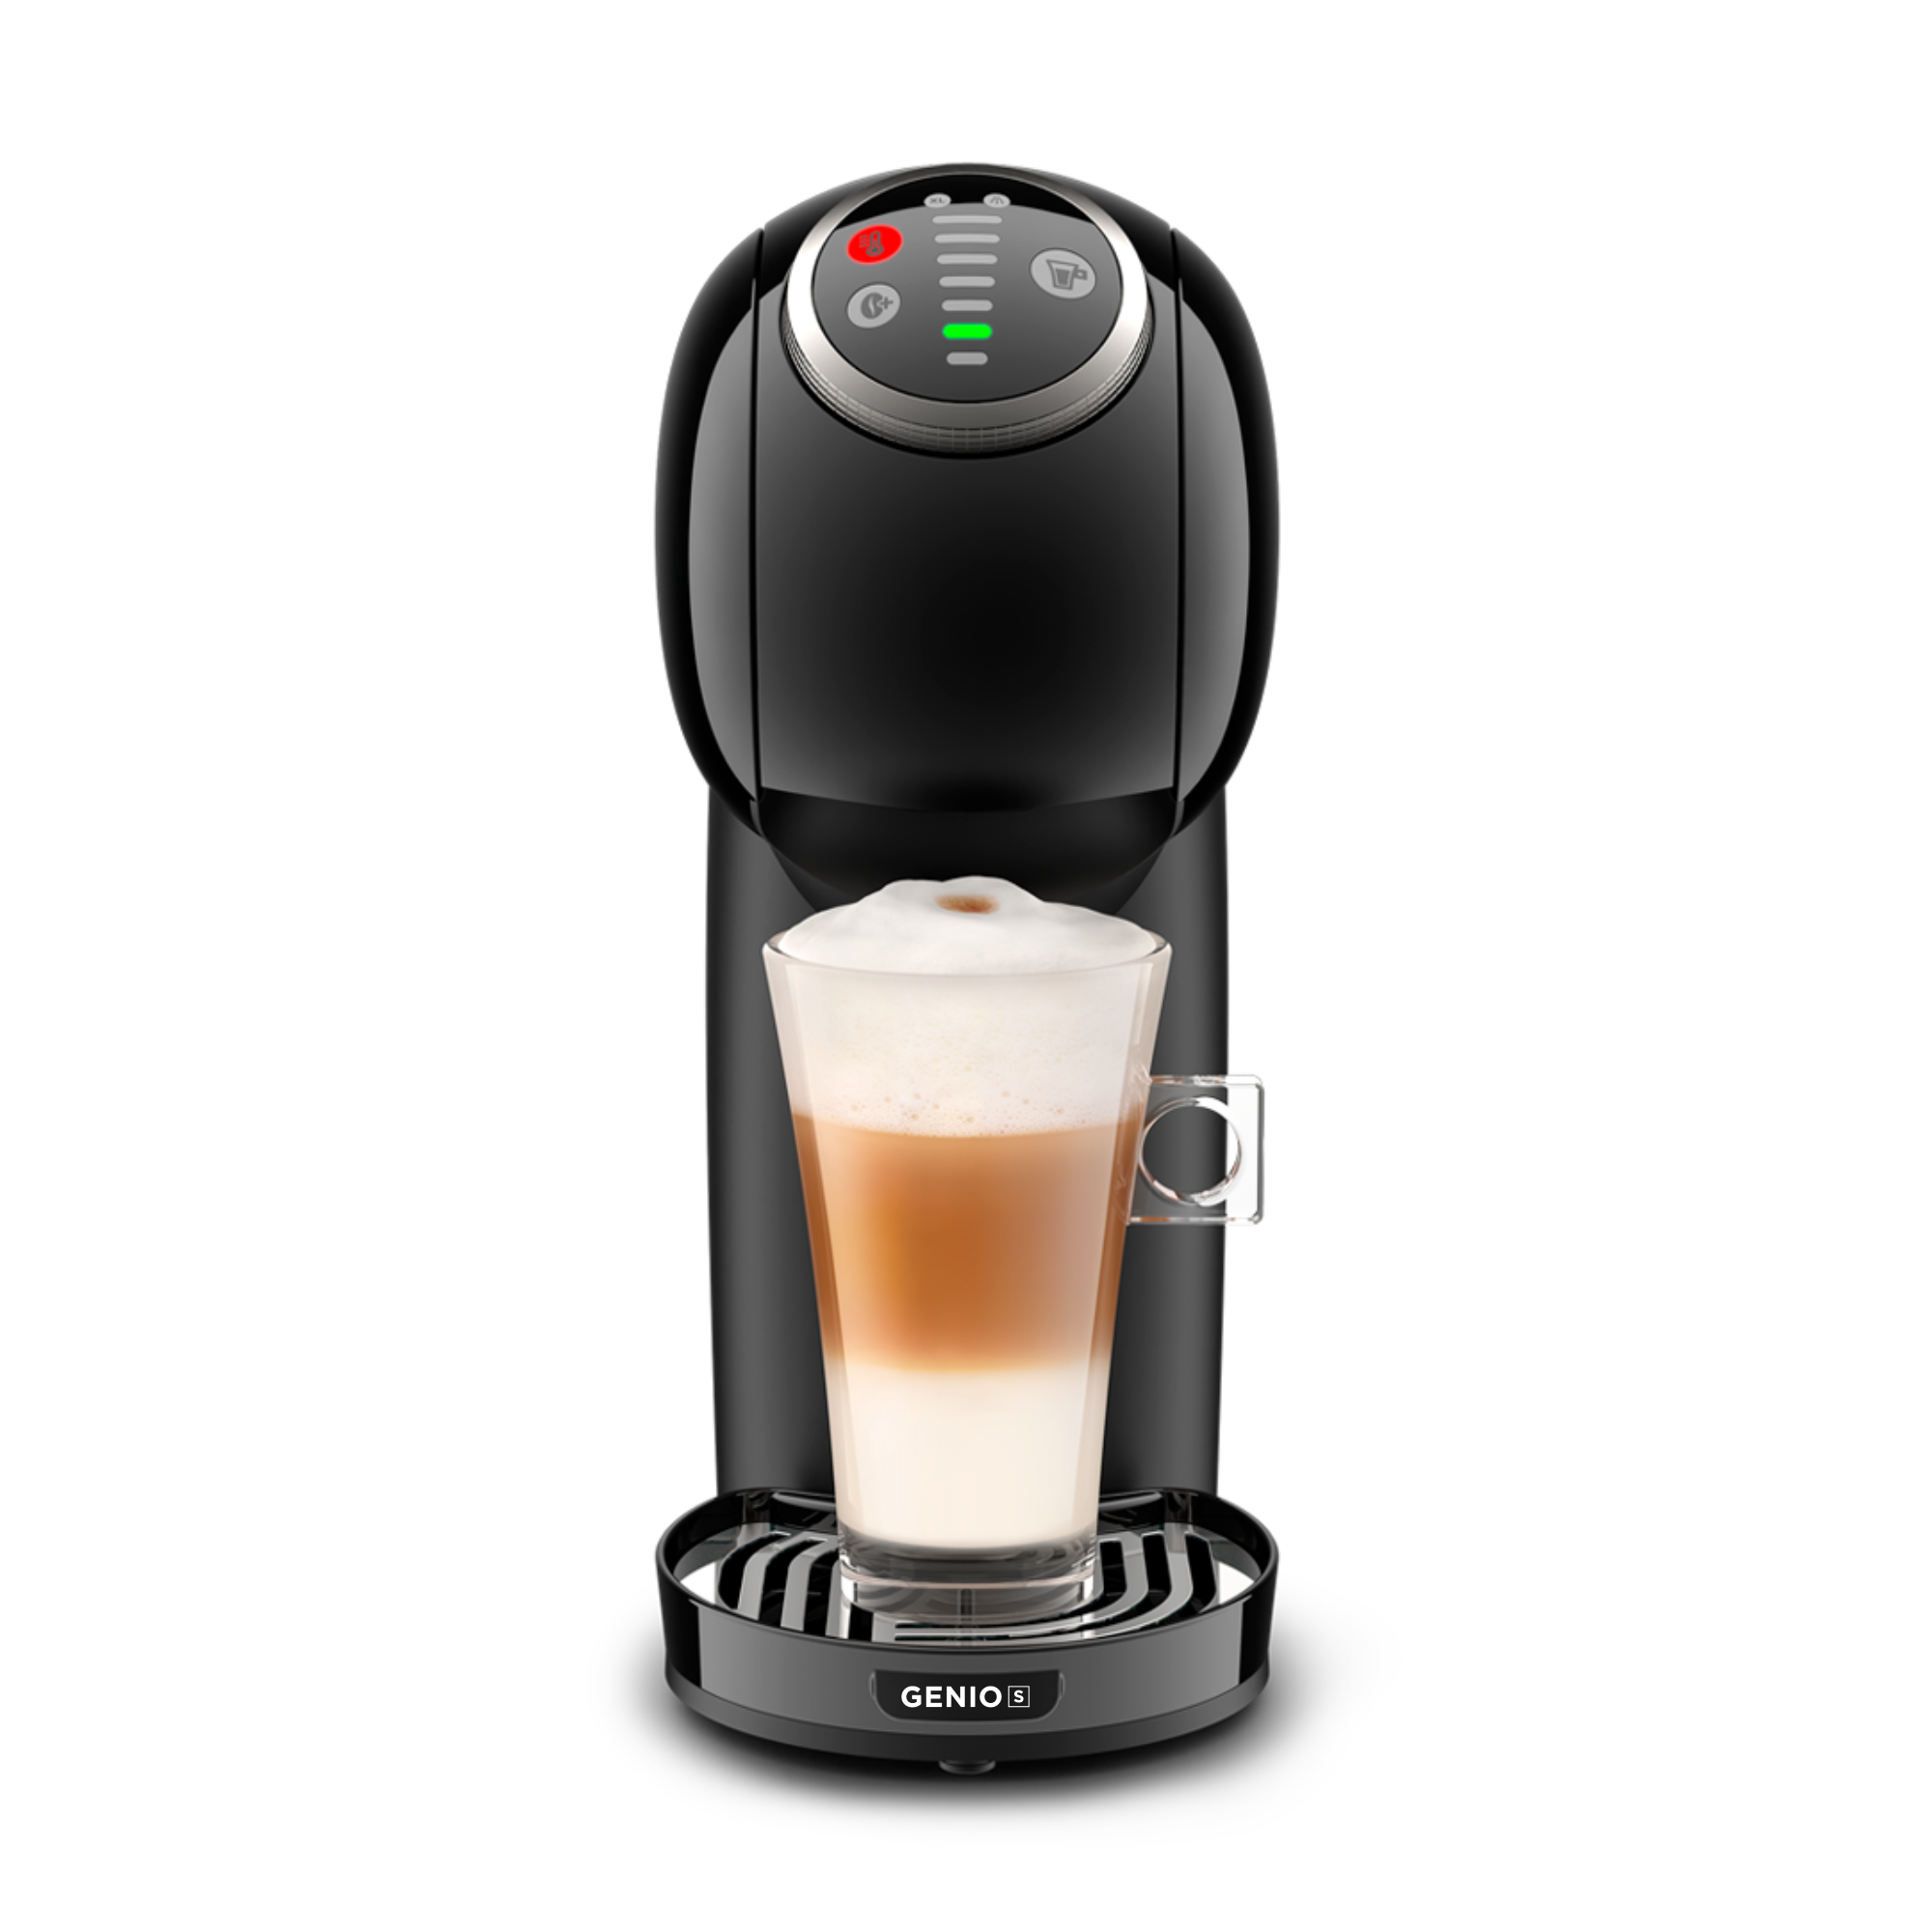 Review: Dolce Gusto® Coffee Machine - Latest News and Reviews